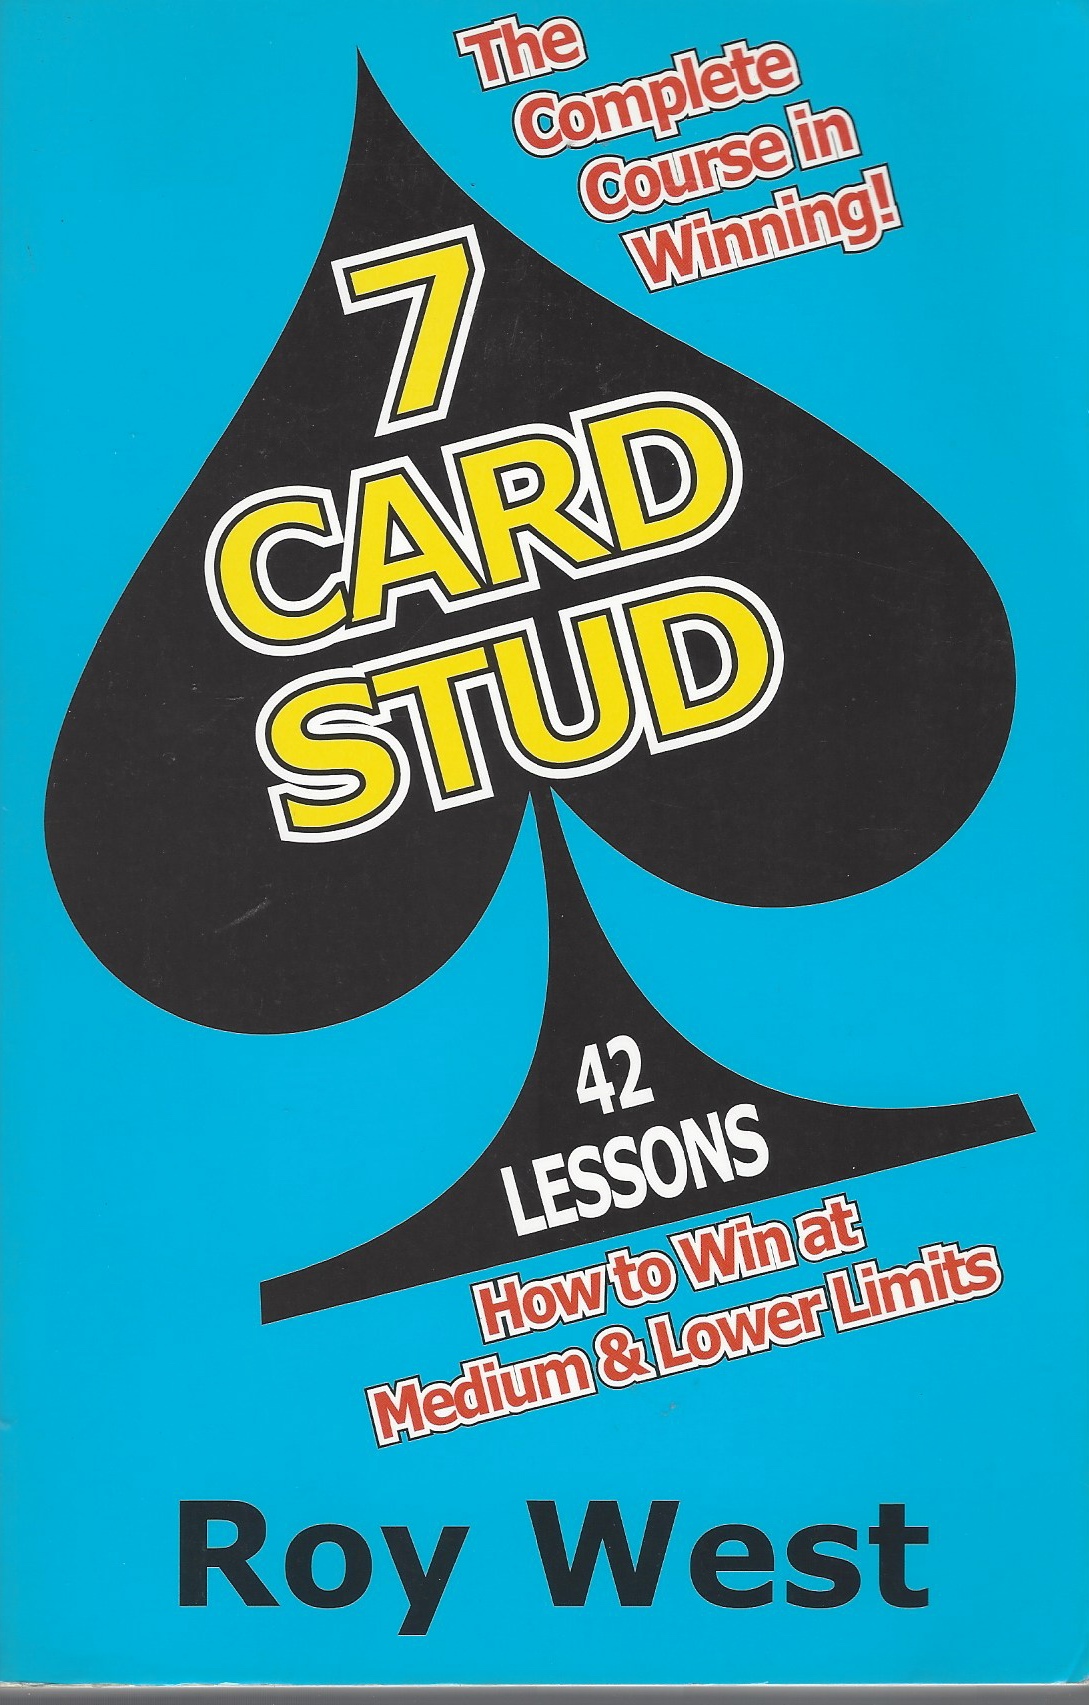 WEST, ROY - 7-Card Stud 42 Lessons How to Win at Medium & Lower Limits